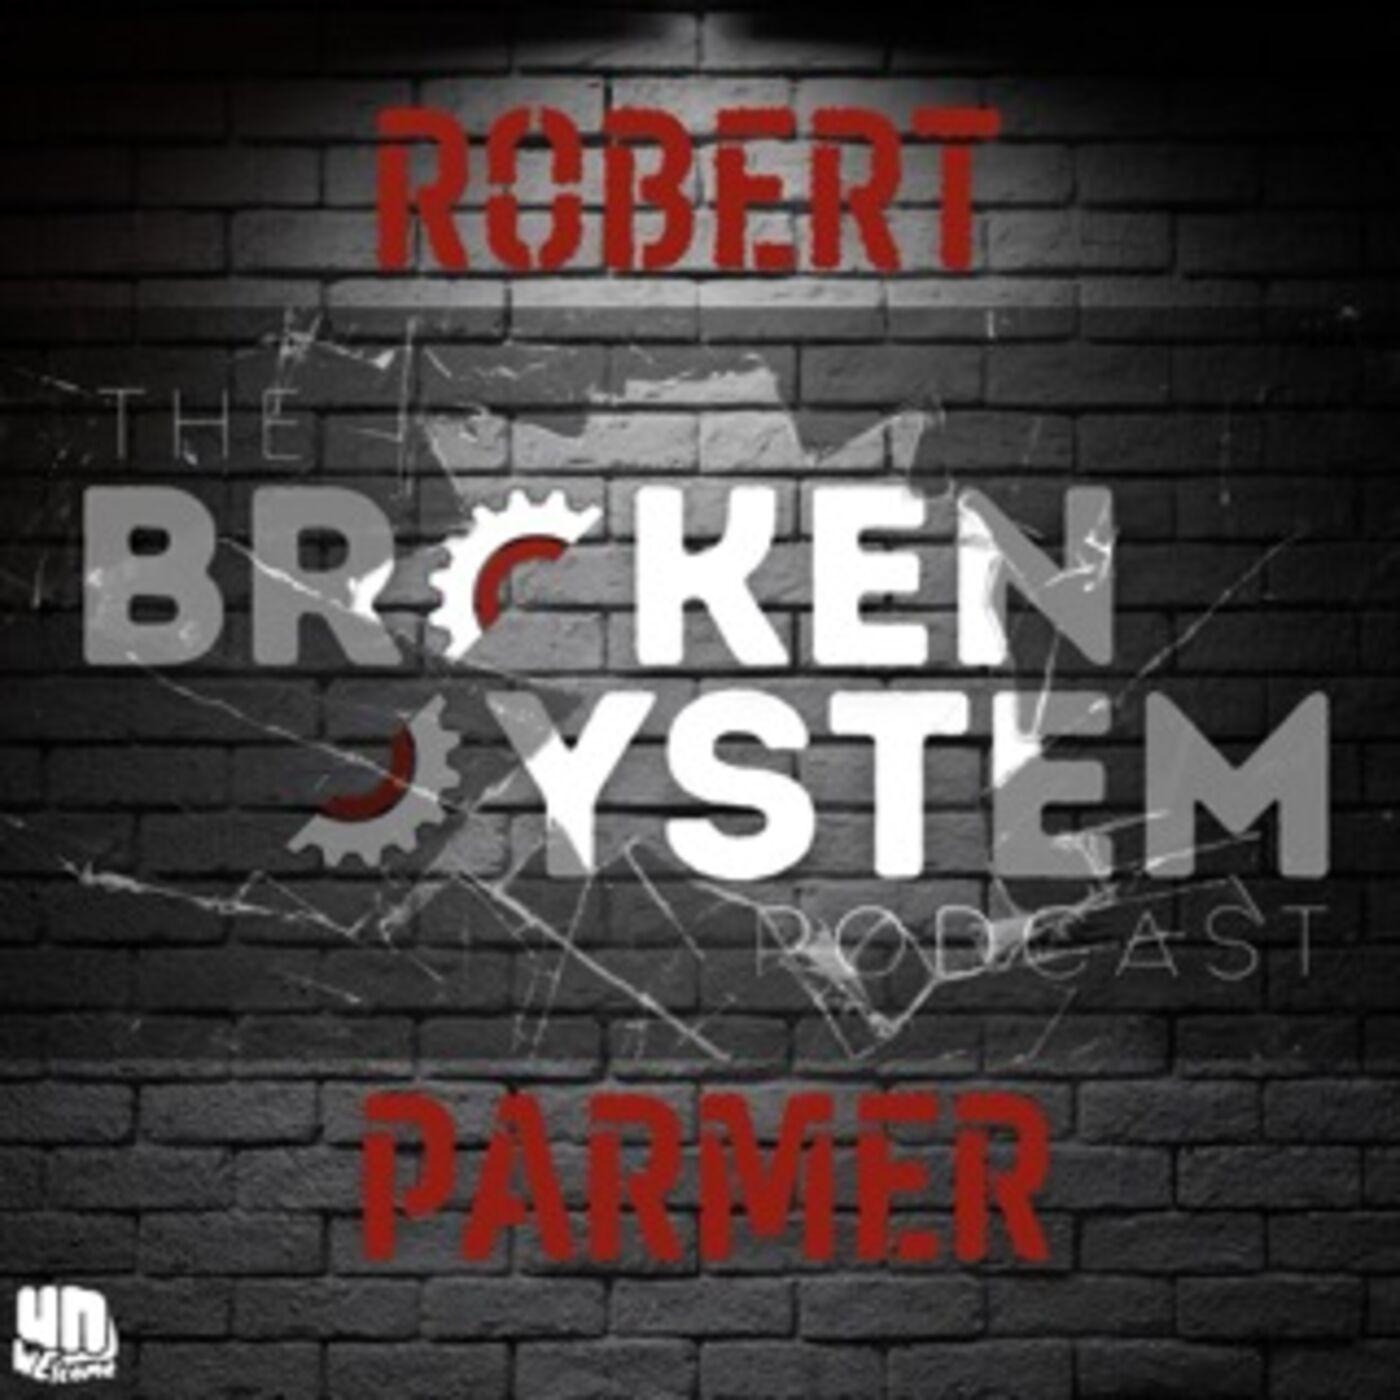 The Broken System Podcast